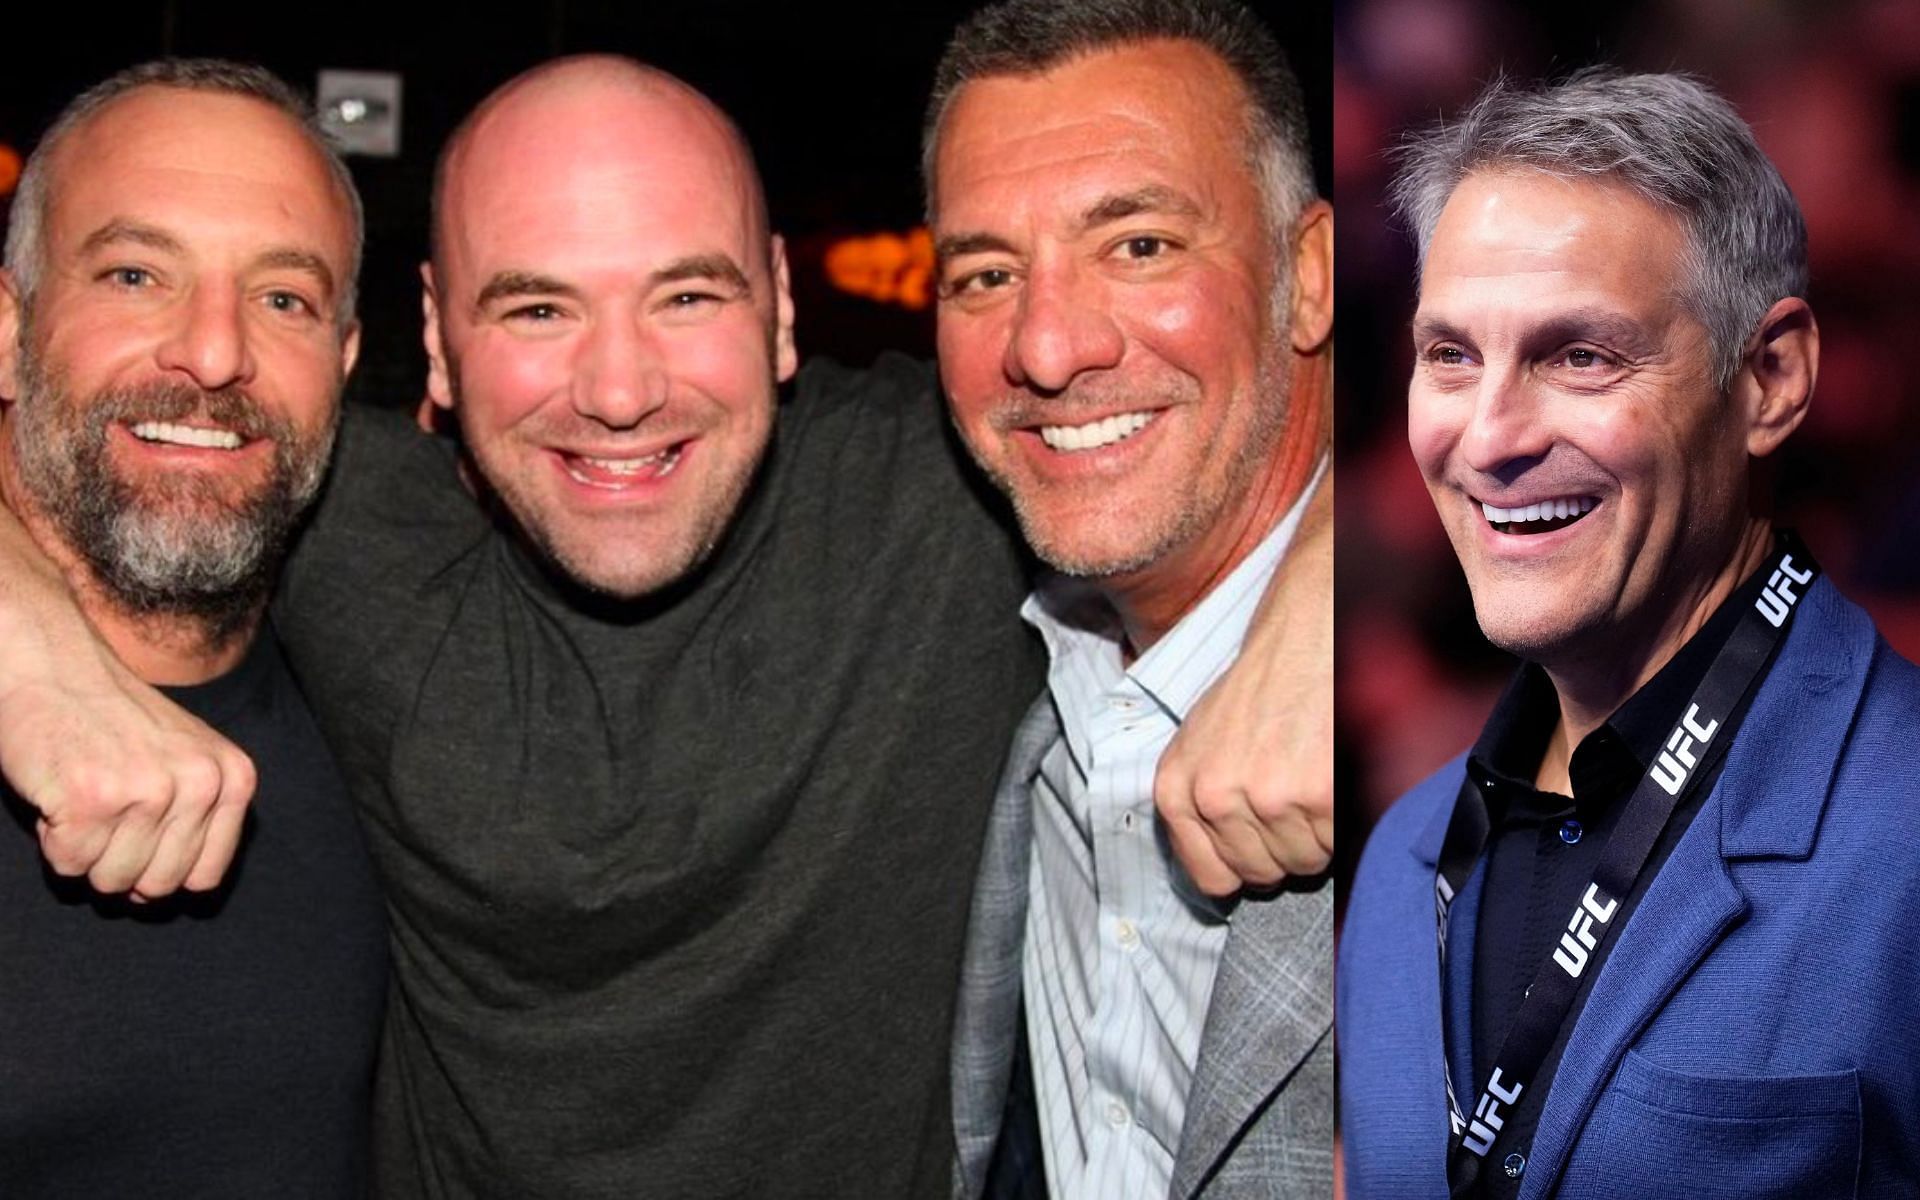 Ari Emanuel (right) purchased the UFC from the Fertitta brothers and Dana White (left) [Photo Courtesy of Getty Images and @mmahistorytoday on X]